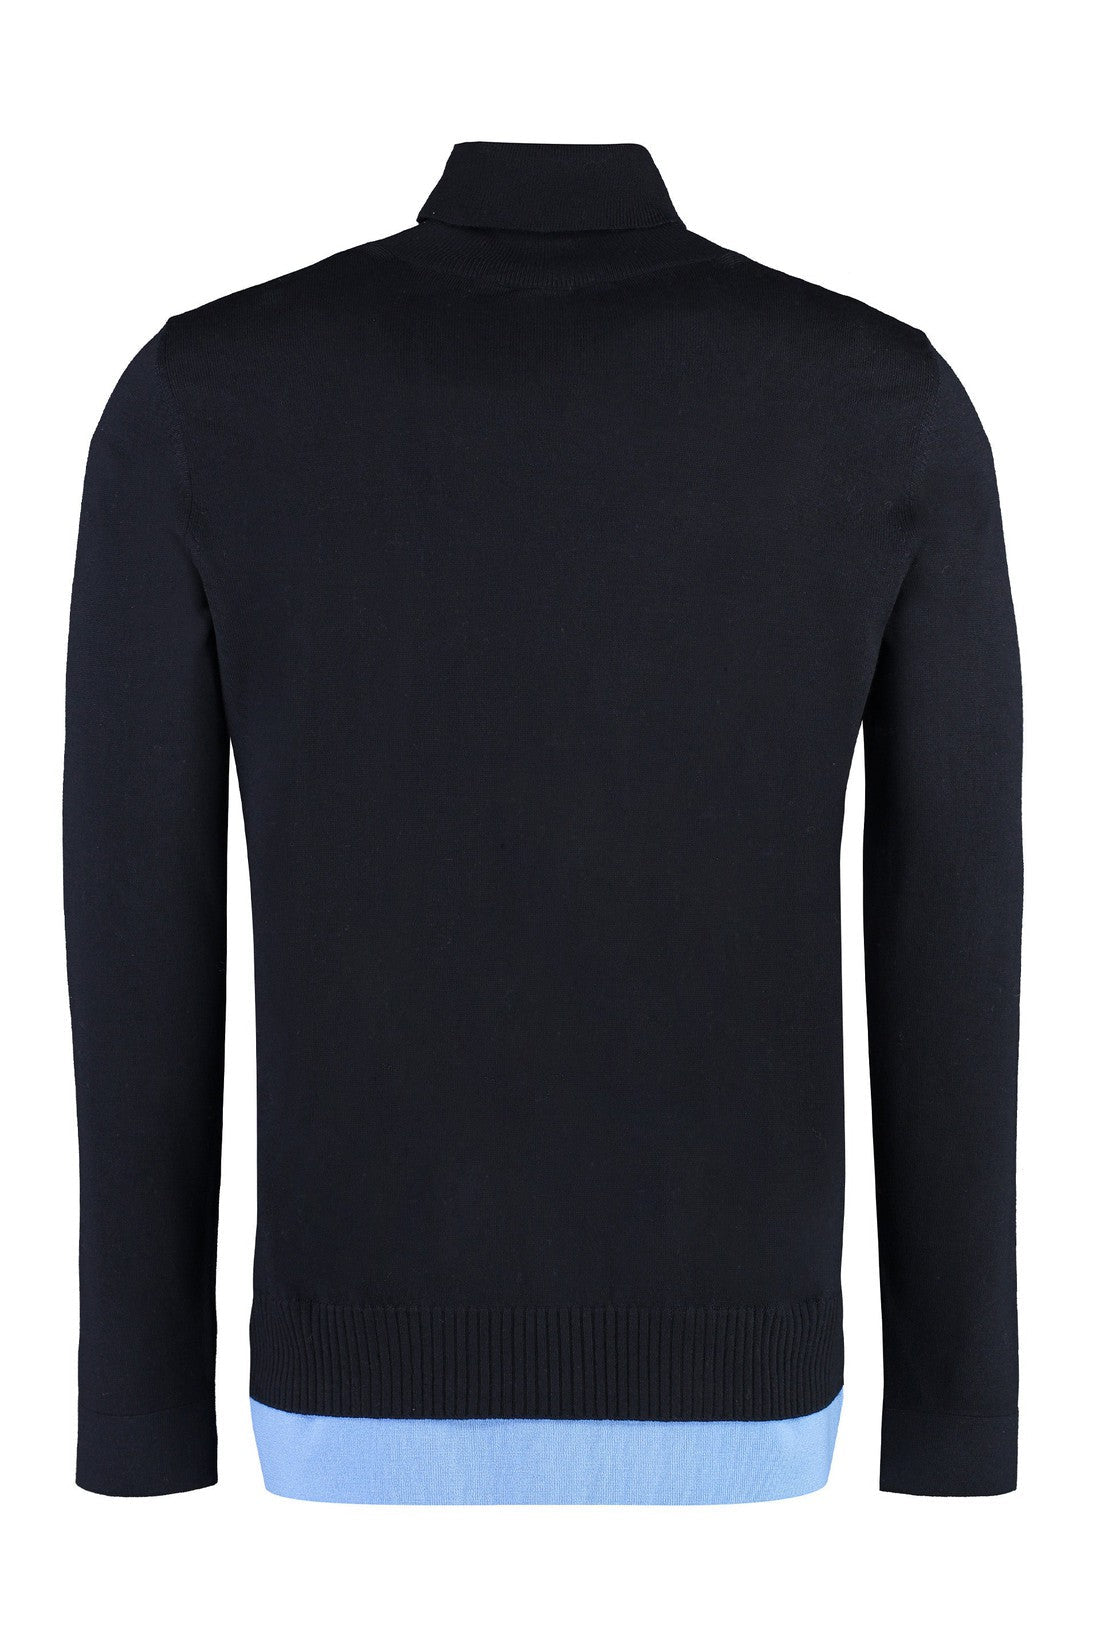 Off-White-OUTLET-SALE-Wool turtleneck sweater-ARCHIVIST